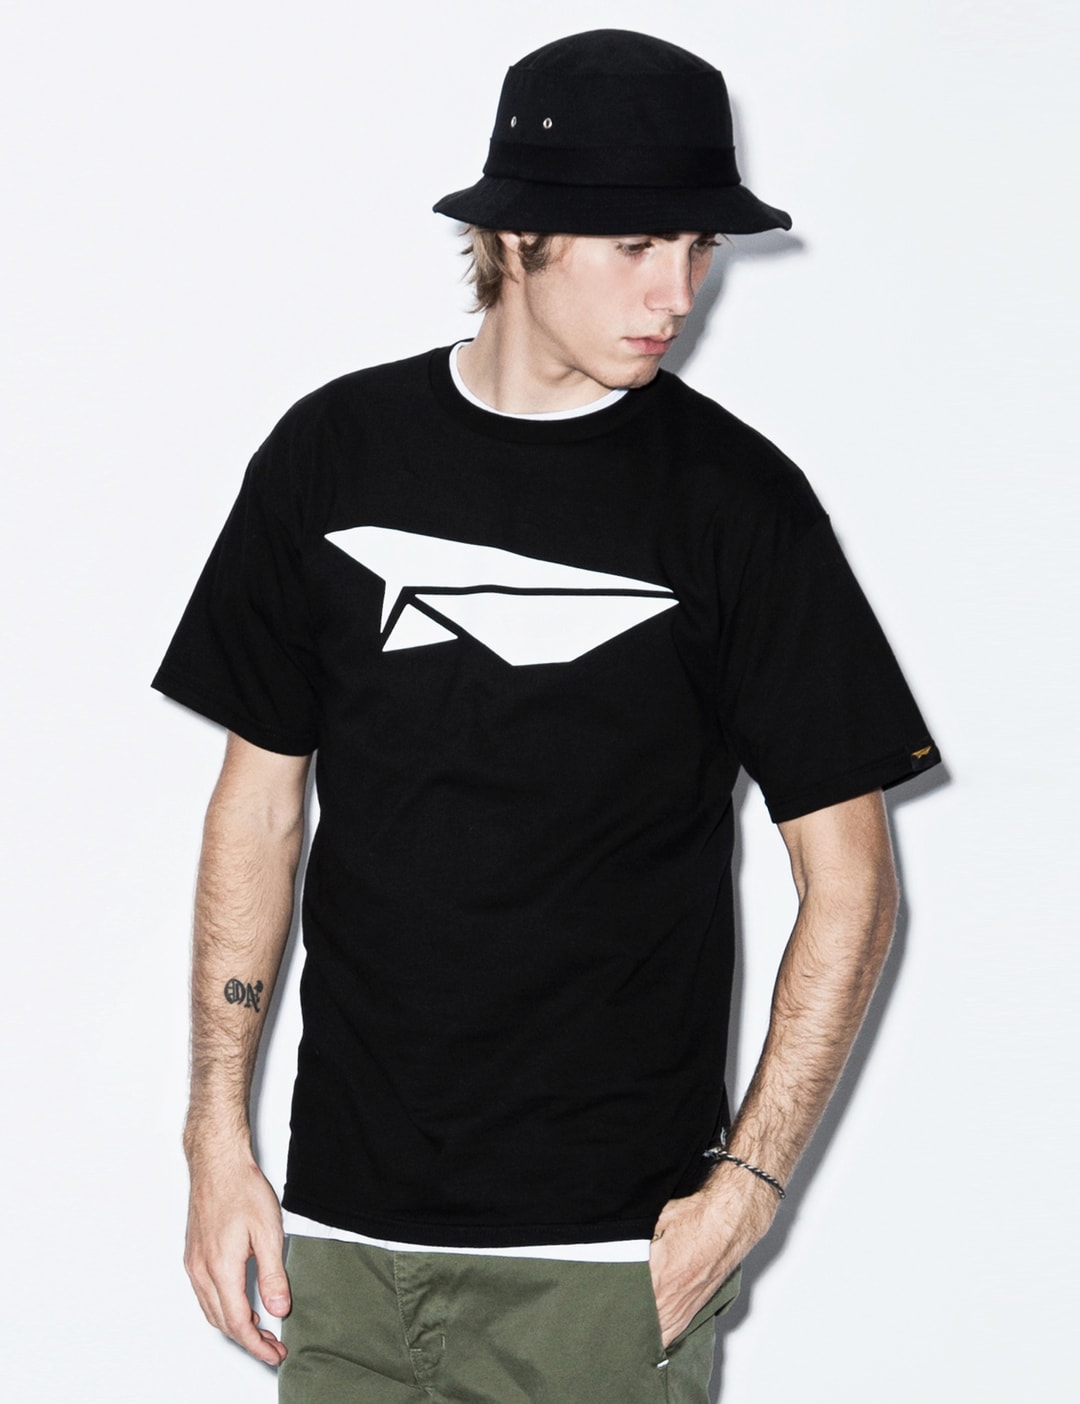 Benny Gold - Black Classic Paper Plane T-Shirt HBX - Globally Curated Fashion and Lifestyle by Hypebeast